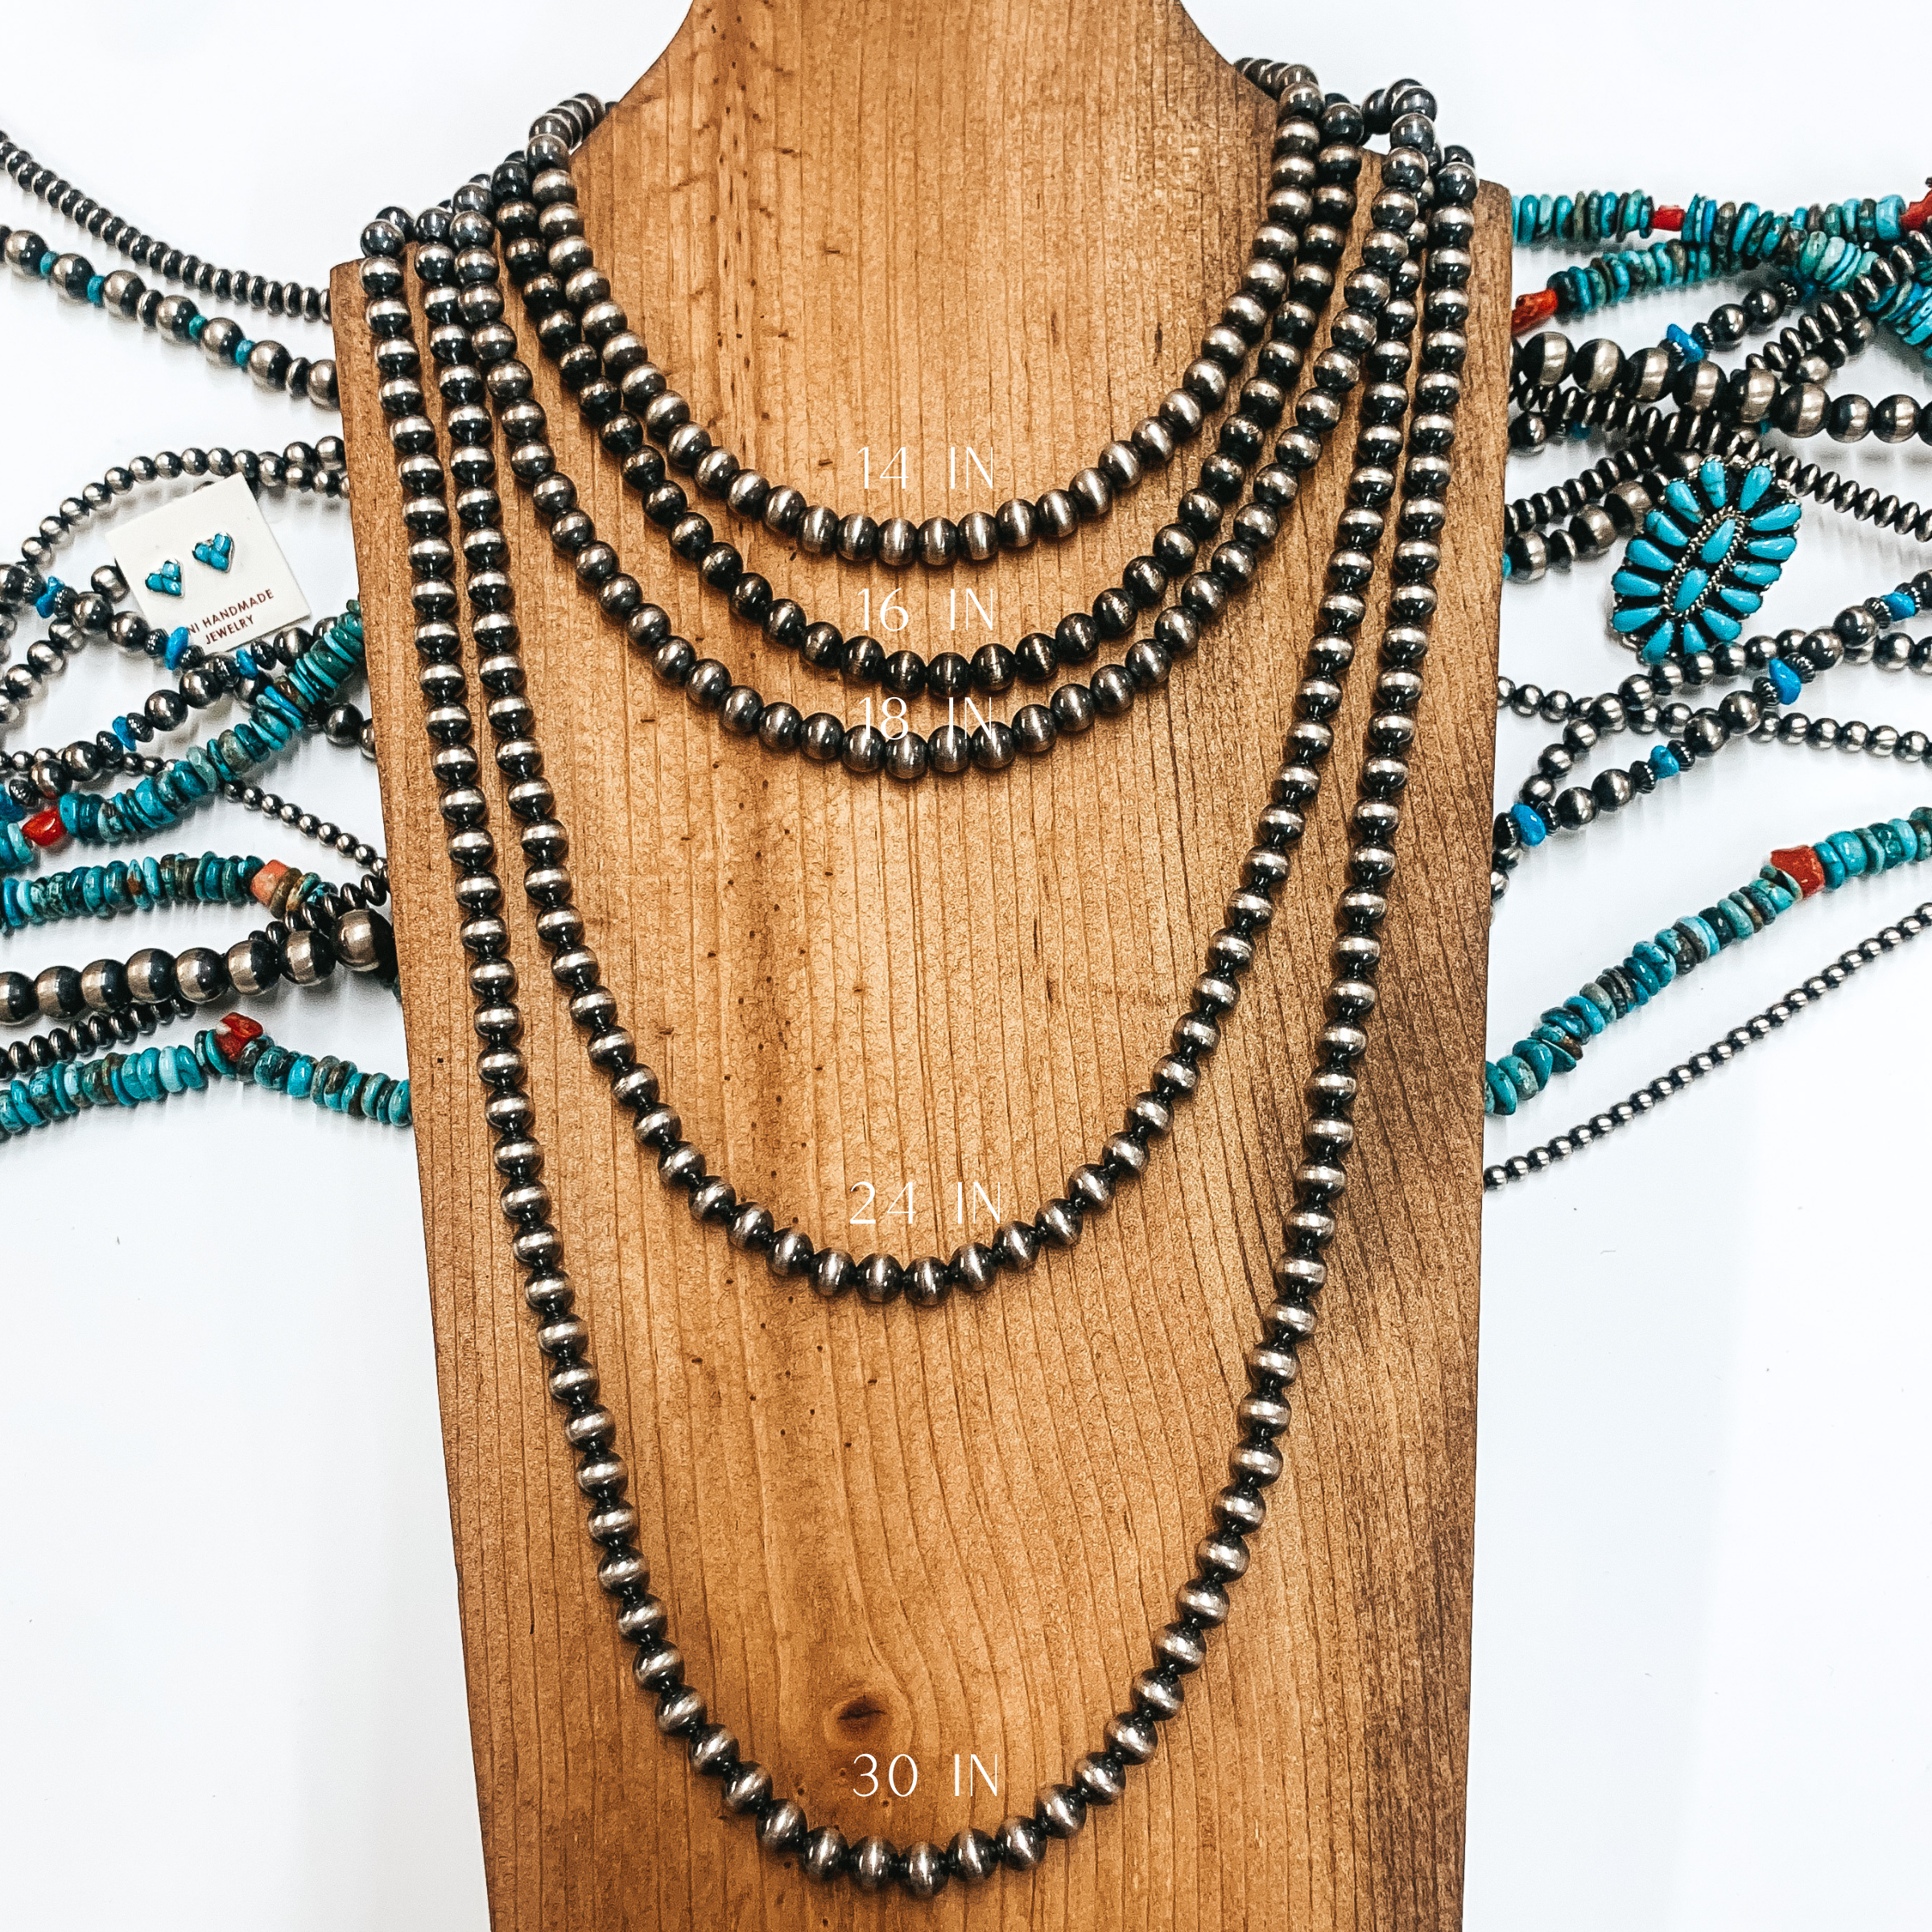 Navajo | Navajo Handmade 7mm Navajo Pearls Necklace | Varying Lengths - Giddy Up Glamour Boutique